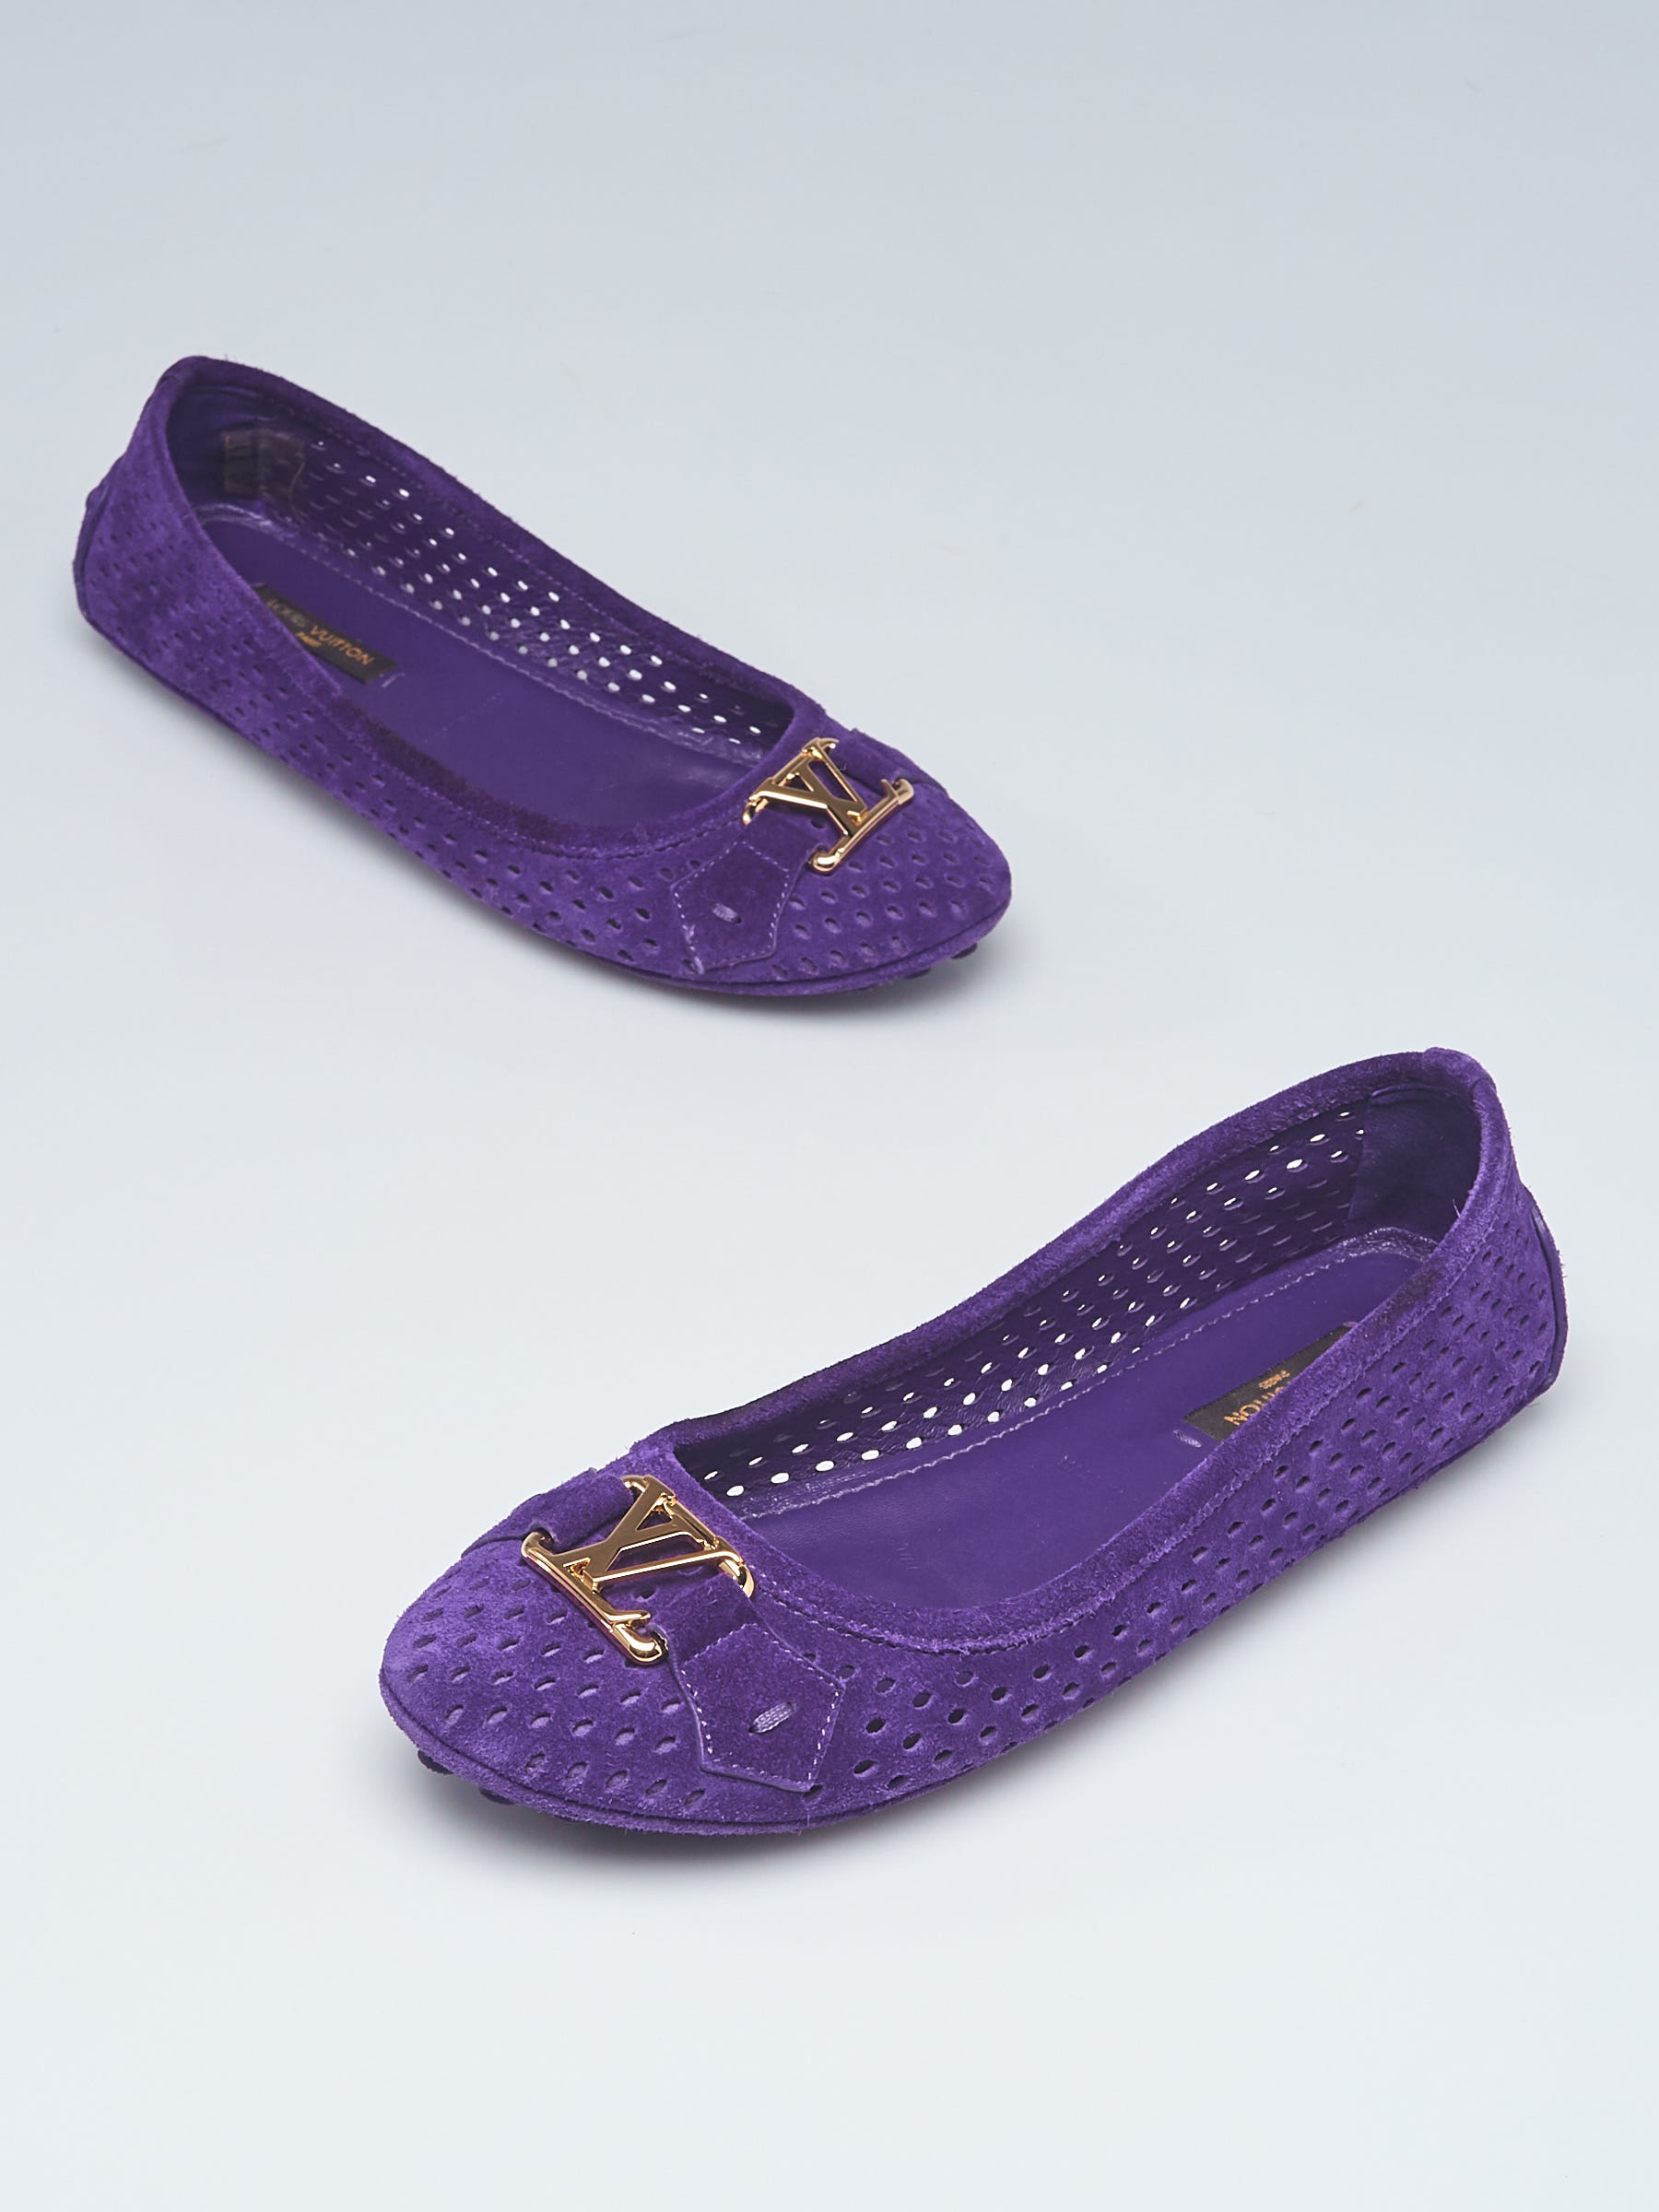 Louis Vuitton Violet Perforated Suede Oxford Ballet Flats Size 4.5/35 -  Yoogi's Closet